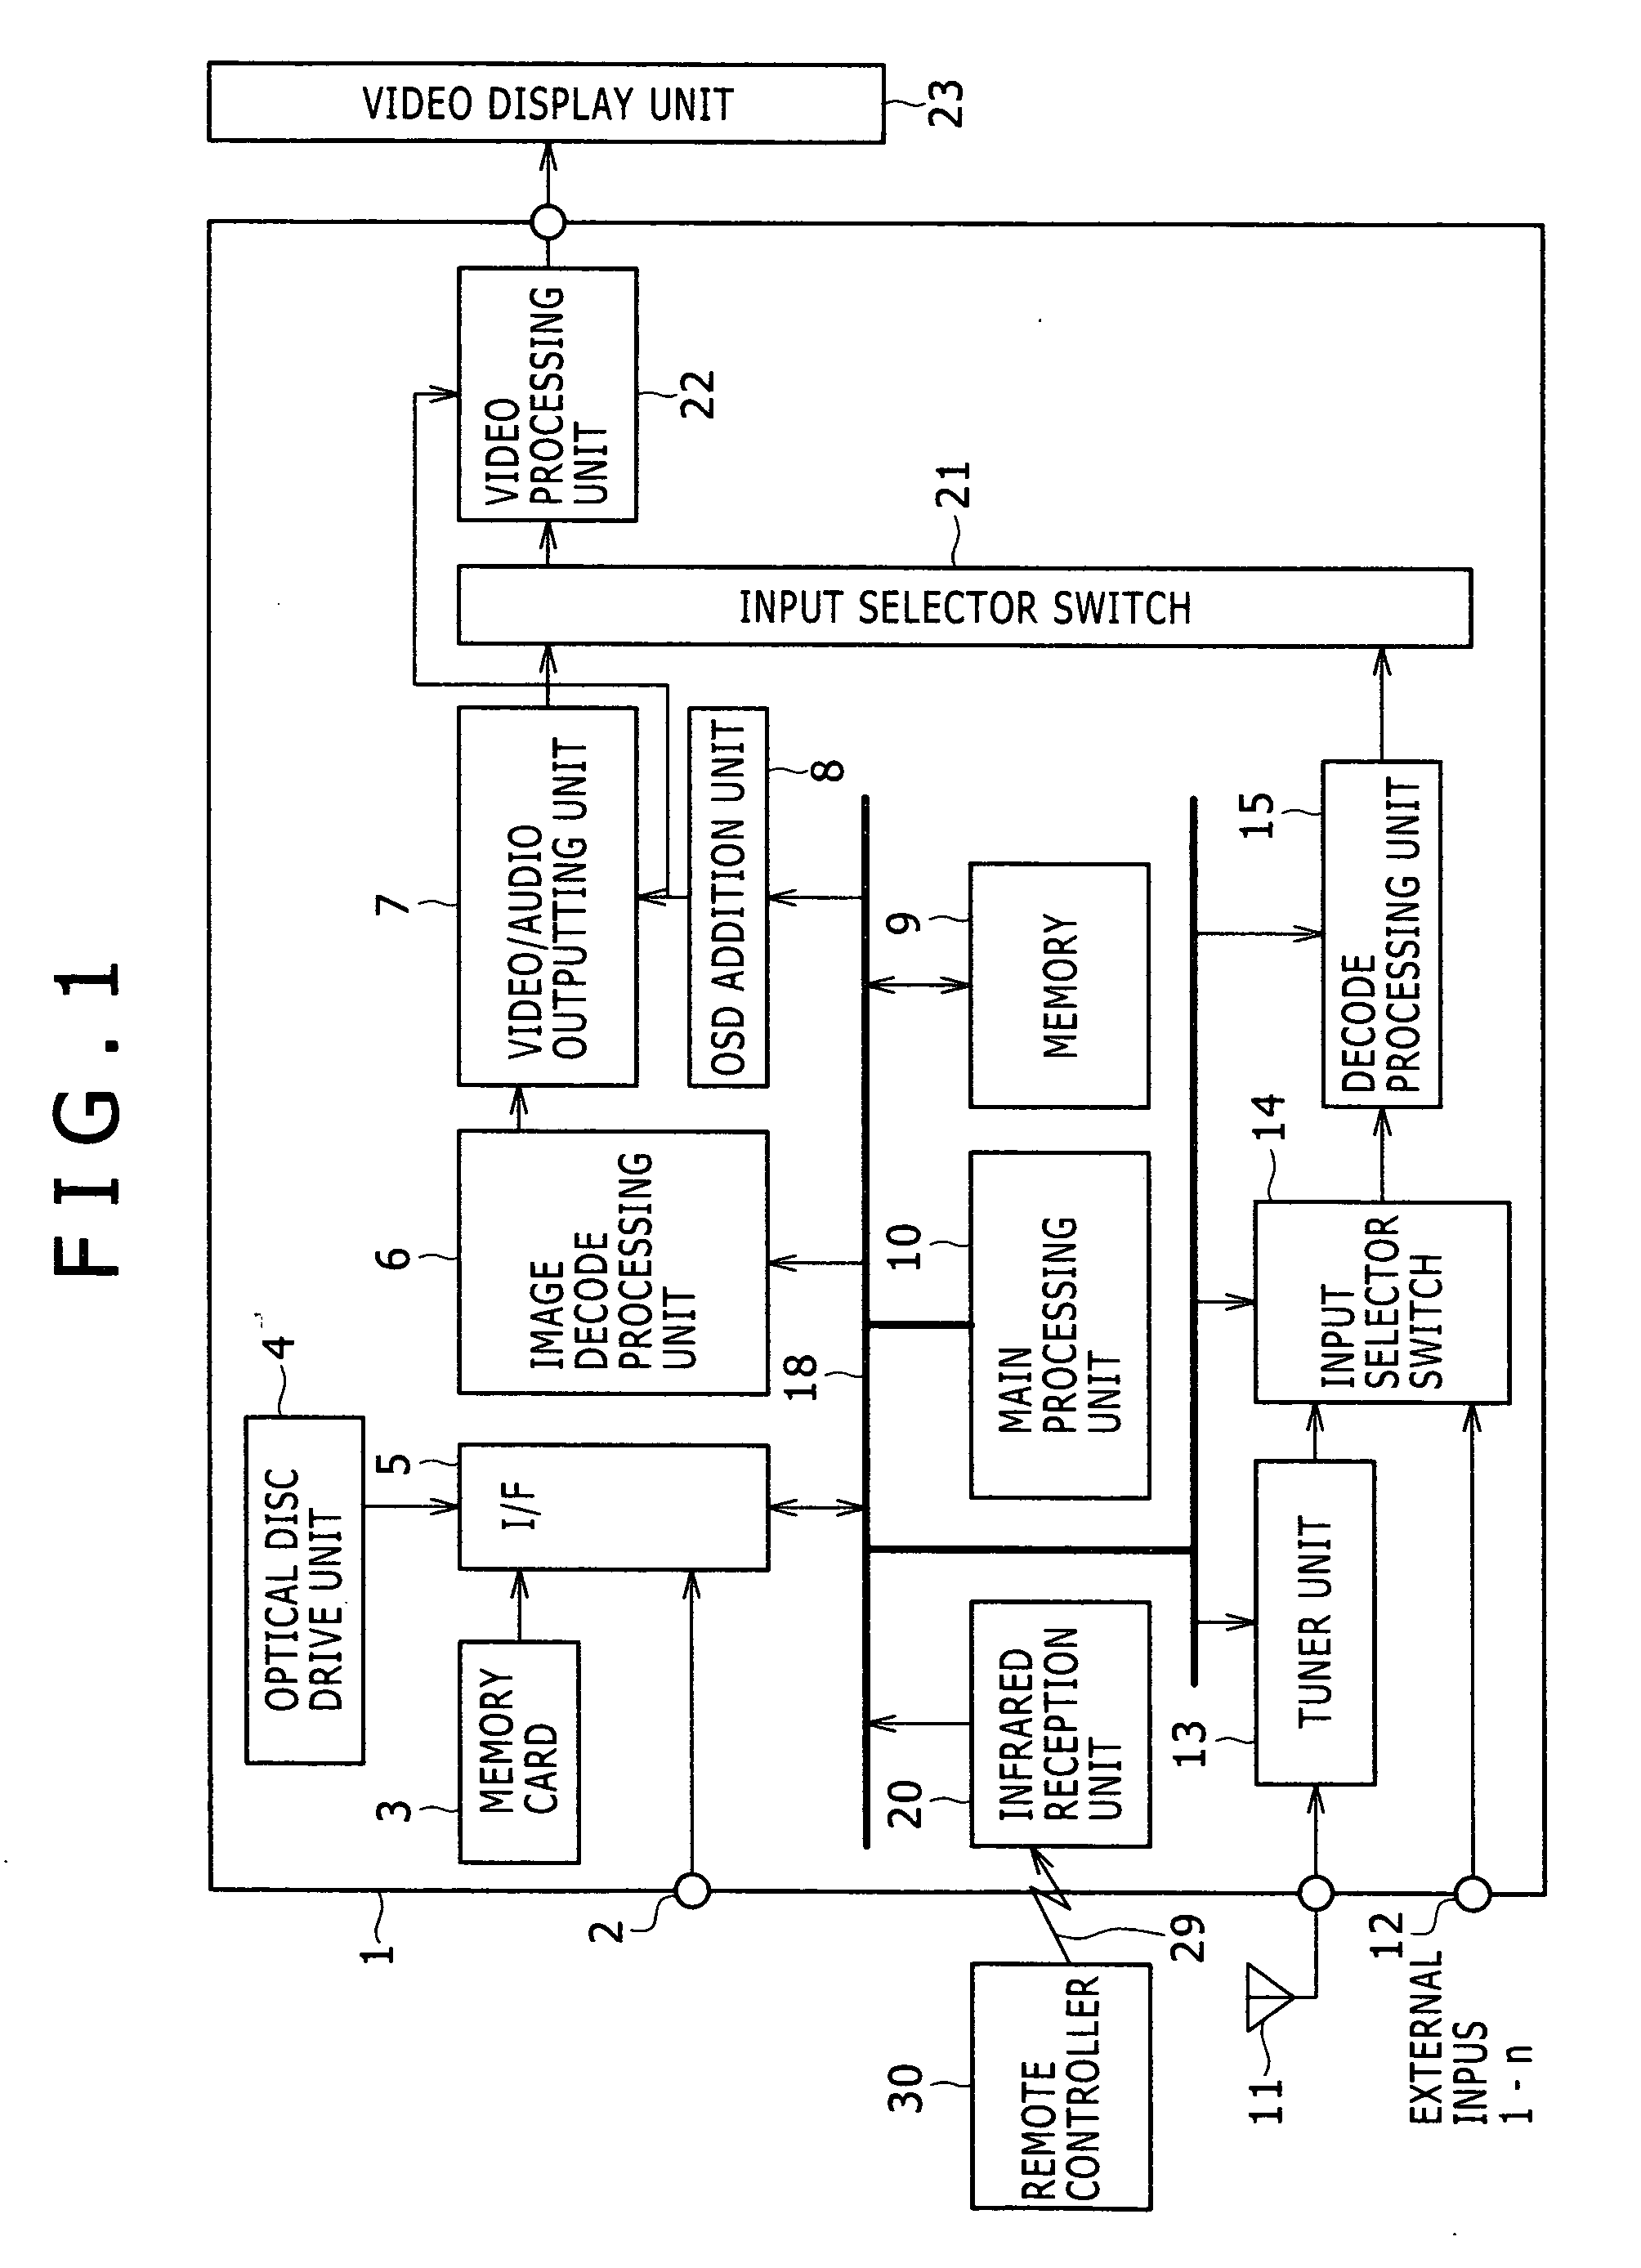 Video reproducing device